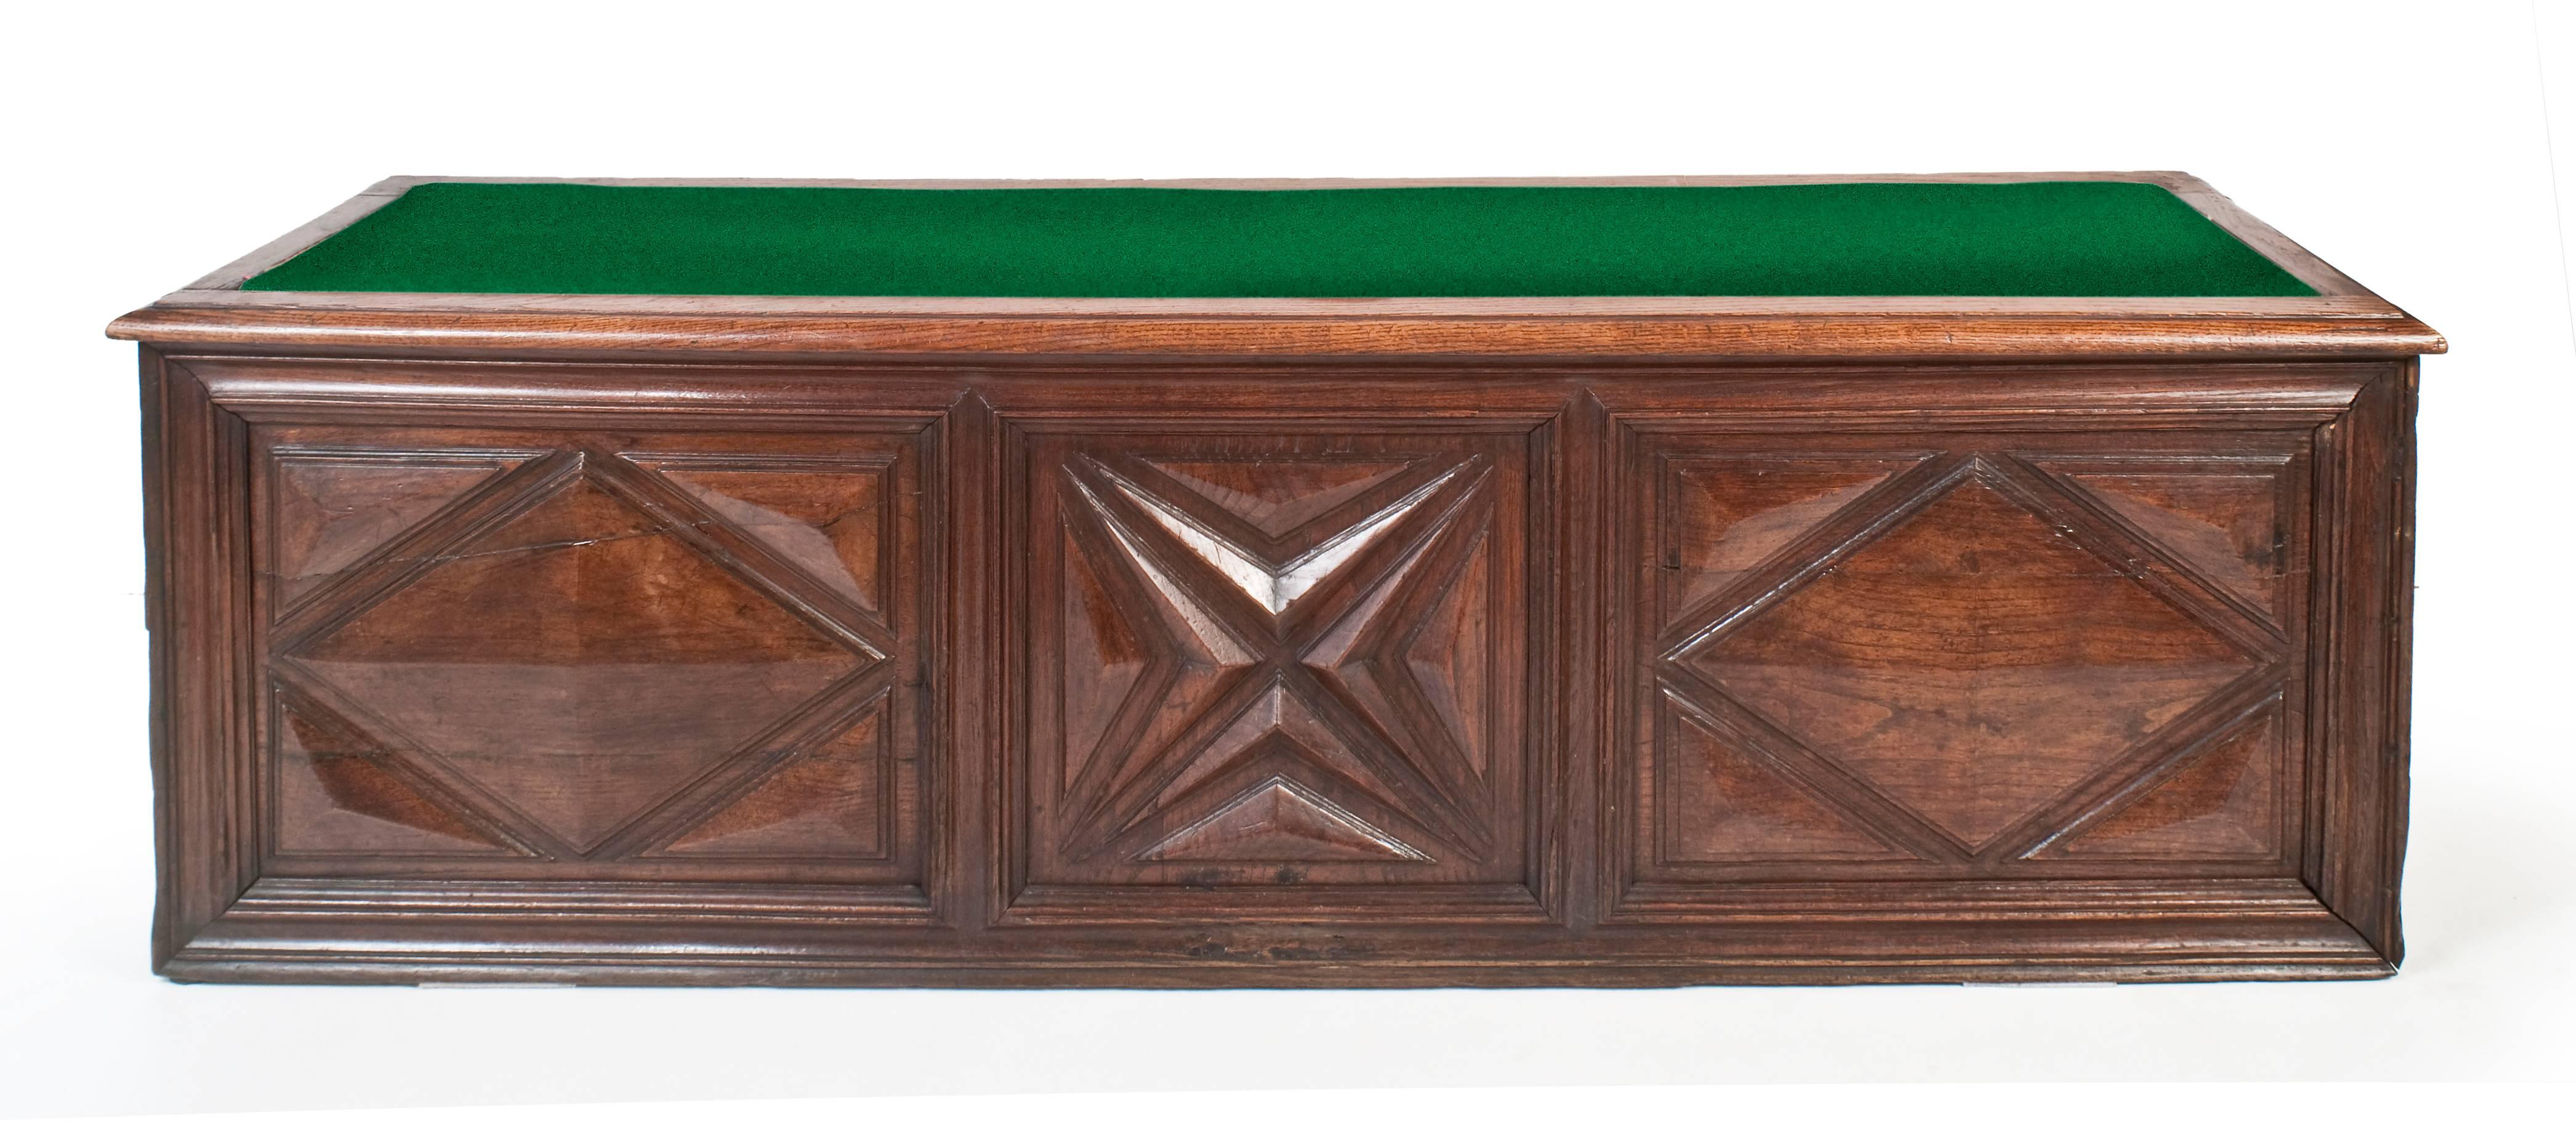 18th century French walnut coffer.
The later hinged tapered, upholstered oak top opening to reveal open storage space above a deep framed rectangular mould, housing three geometric shaped panels. The central a bold ‘X’, flanked by two bold